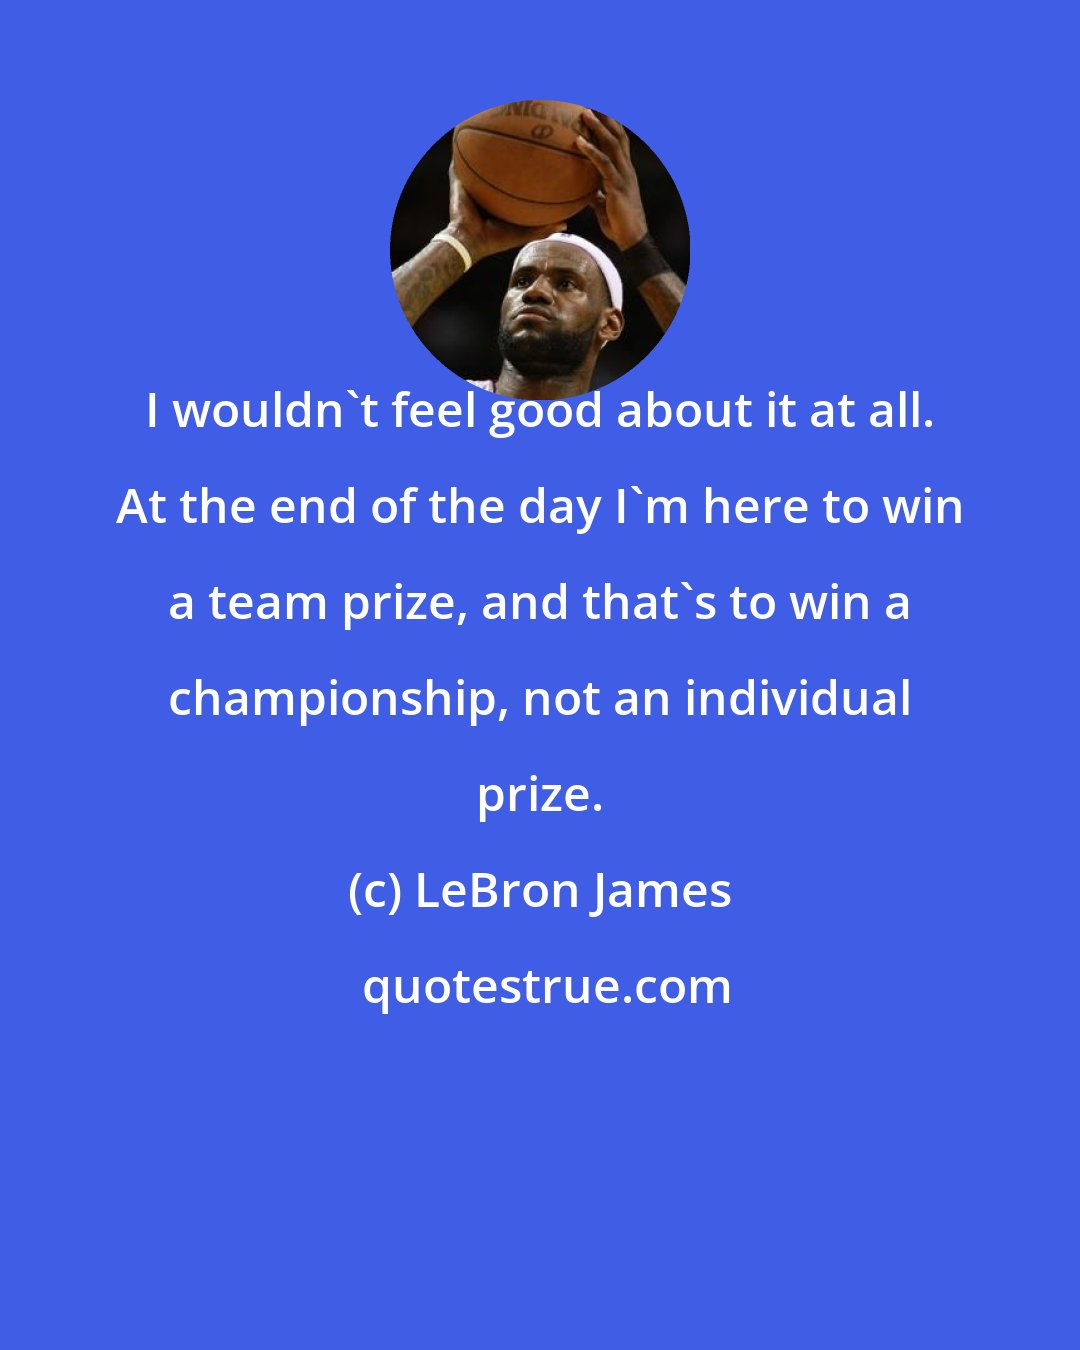 LeBron James: I wouldn't feel good about it at all. At the end of the day I'm here to win a team prize, and that's to win a championship, not an individual prize.